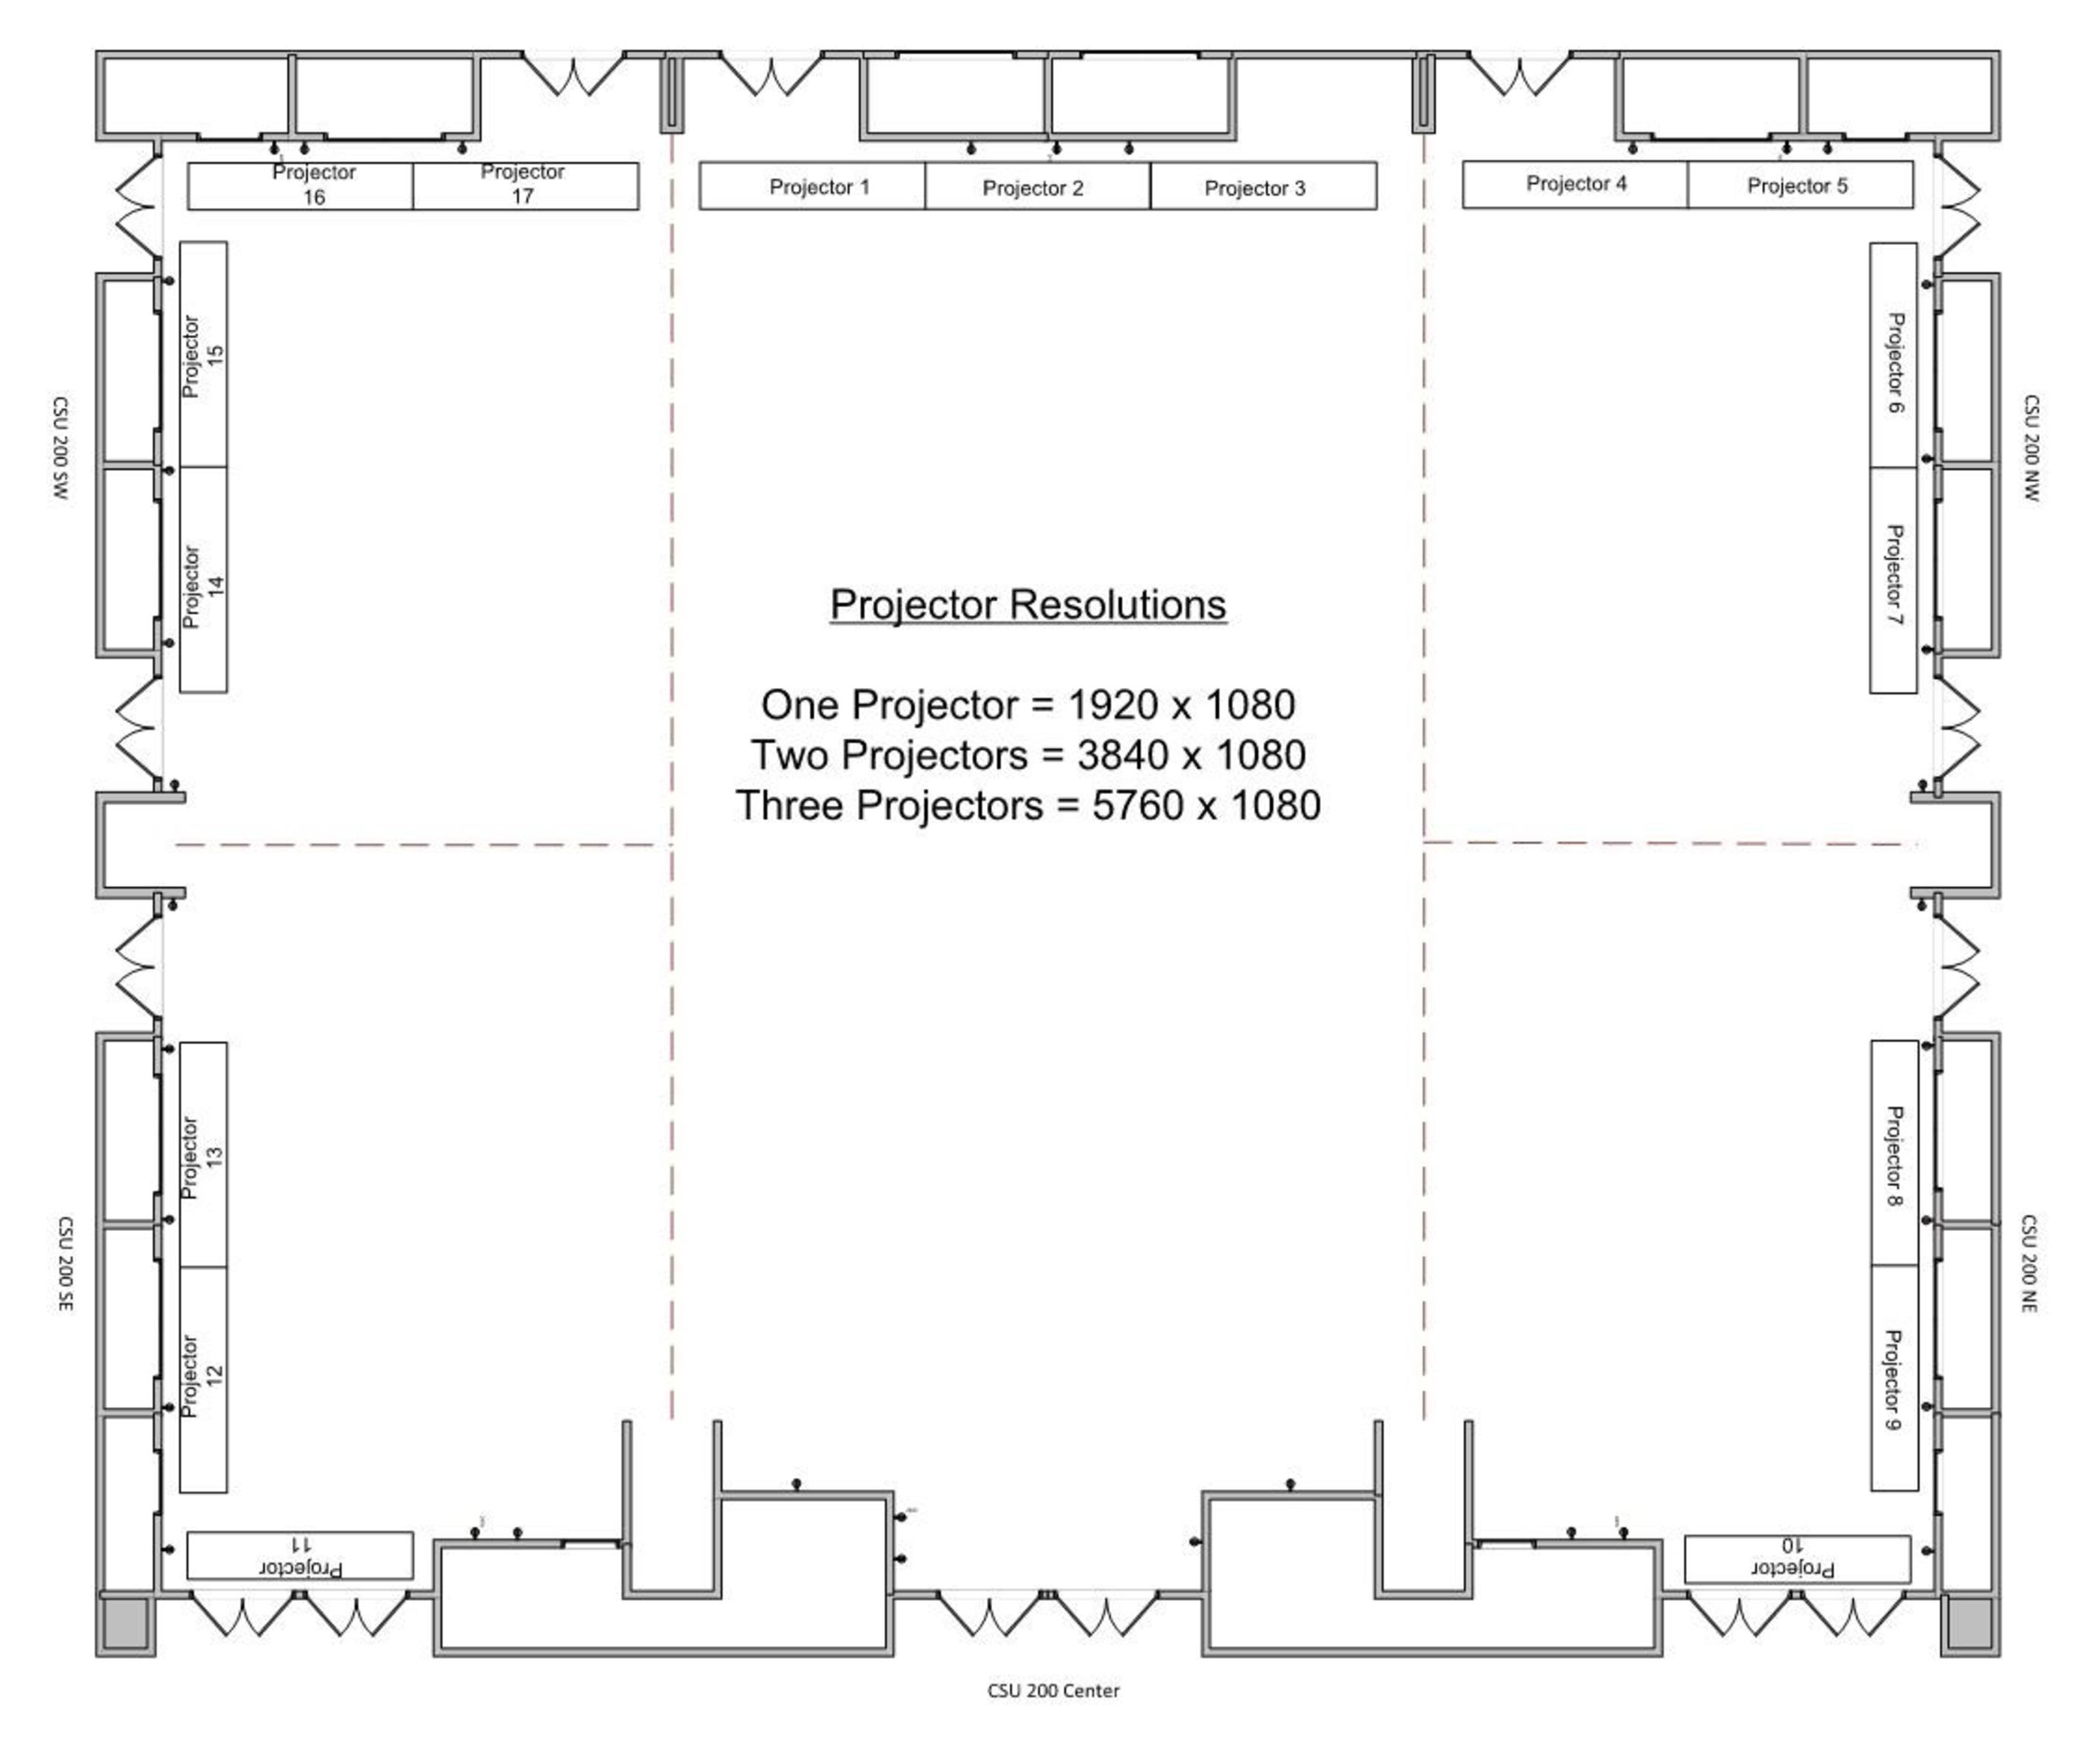 The Centennial Student Union Ballroom Technical Specifications